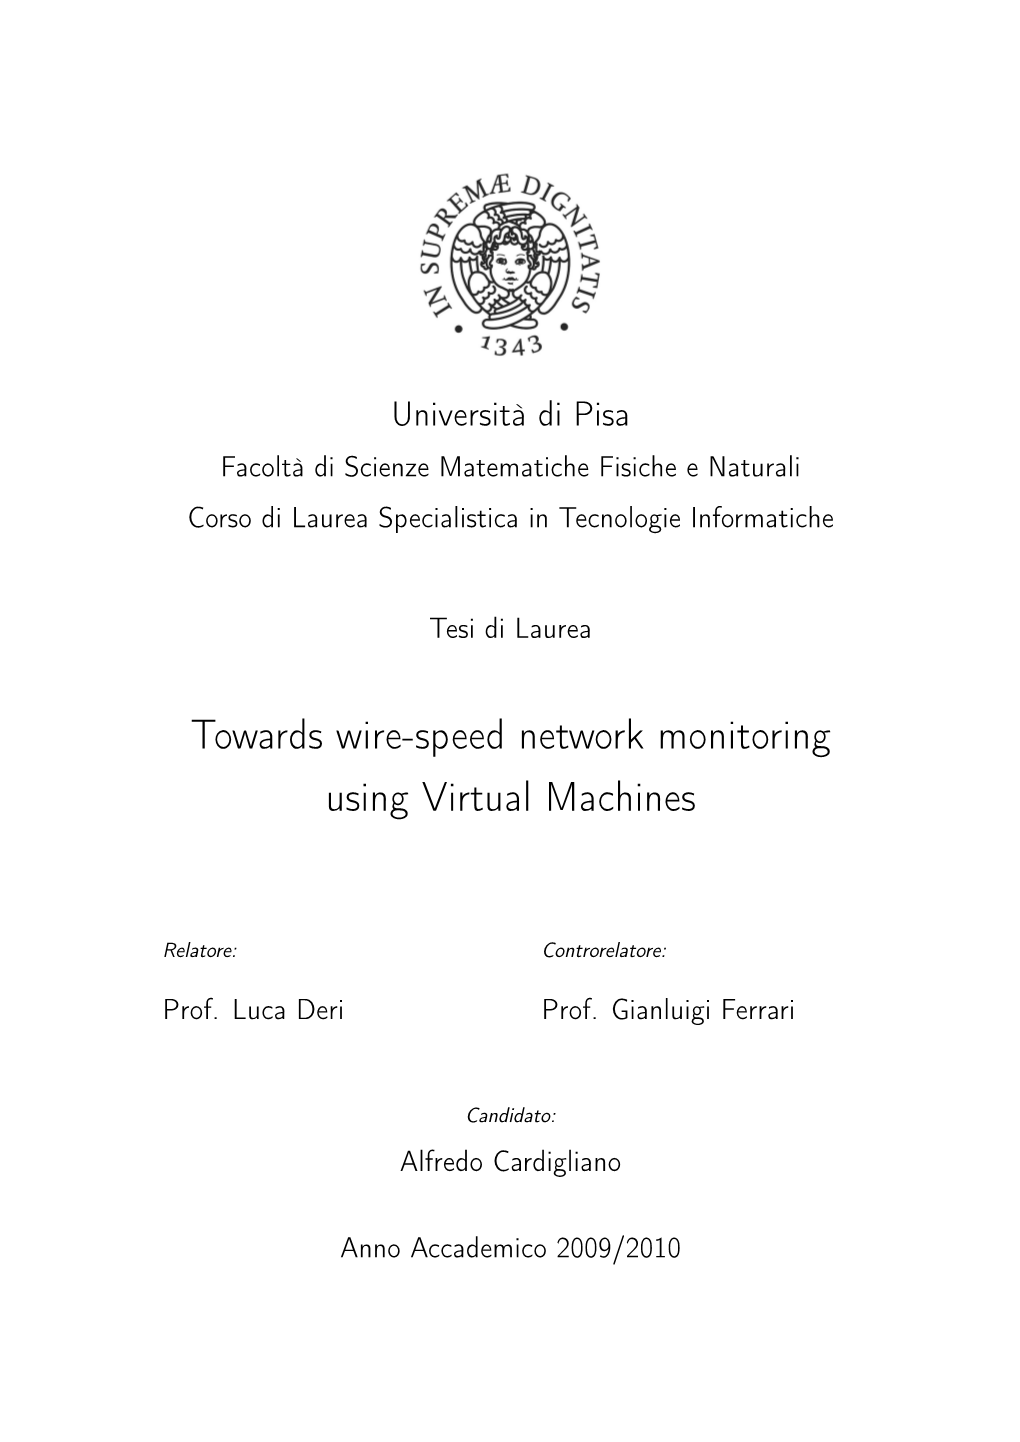 Towards Wire-Speed Network Monitoring Using Virtual Machines